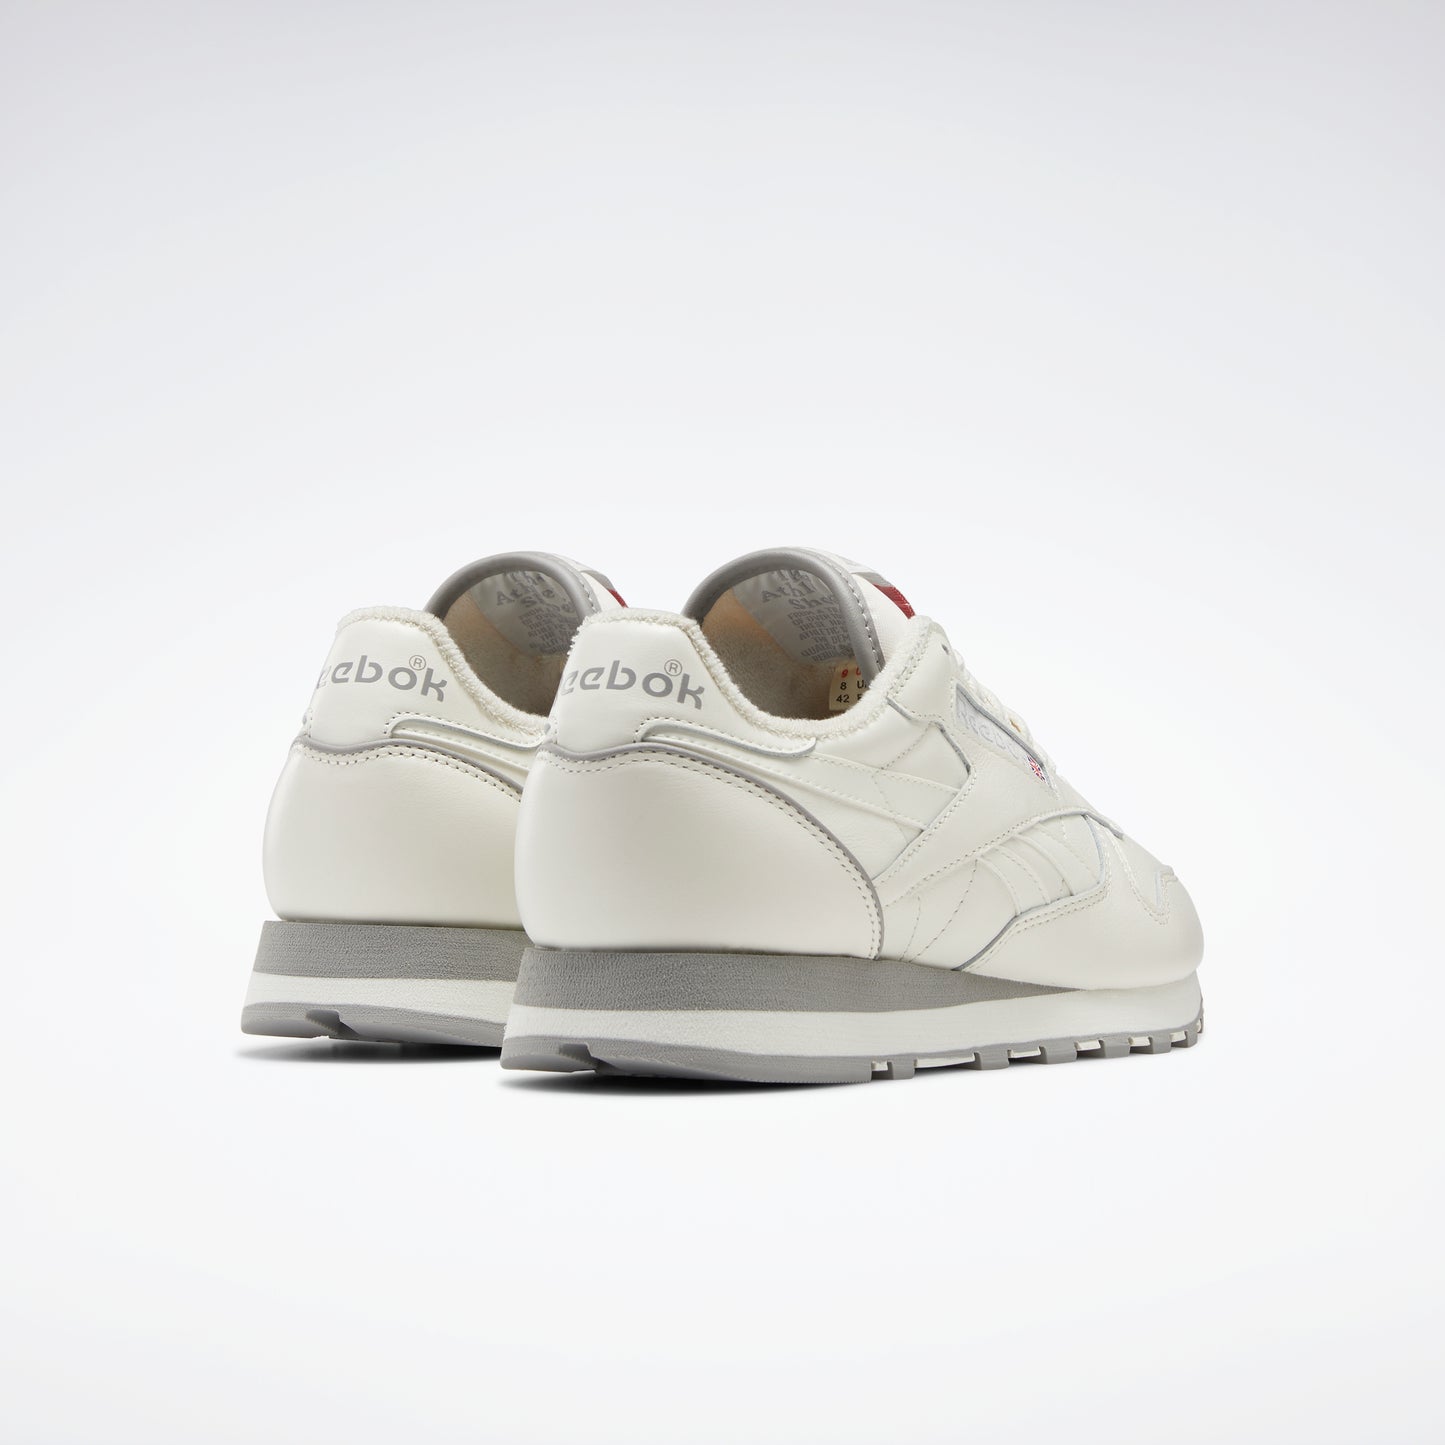 Chaussures Reebok Hommes Classic Leather 1983 Vintage Chaussures Craie/Chalk/Vecred